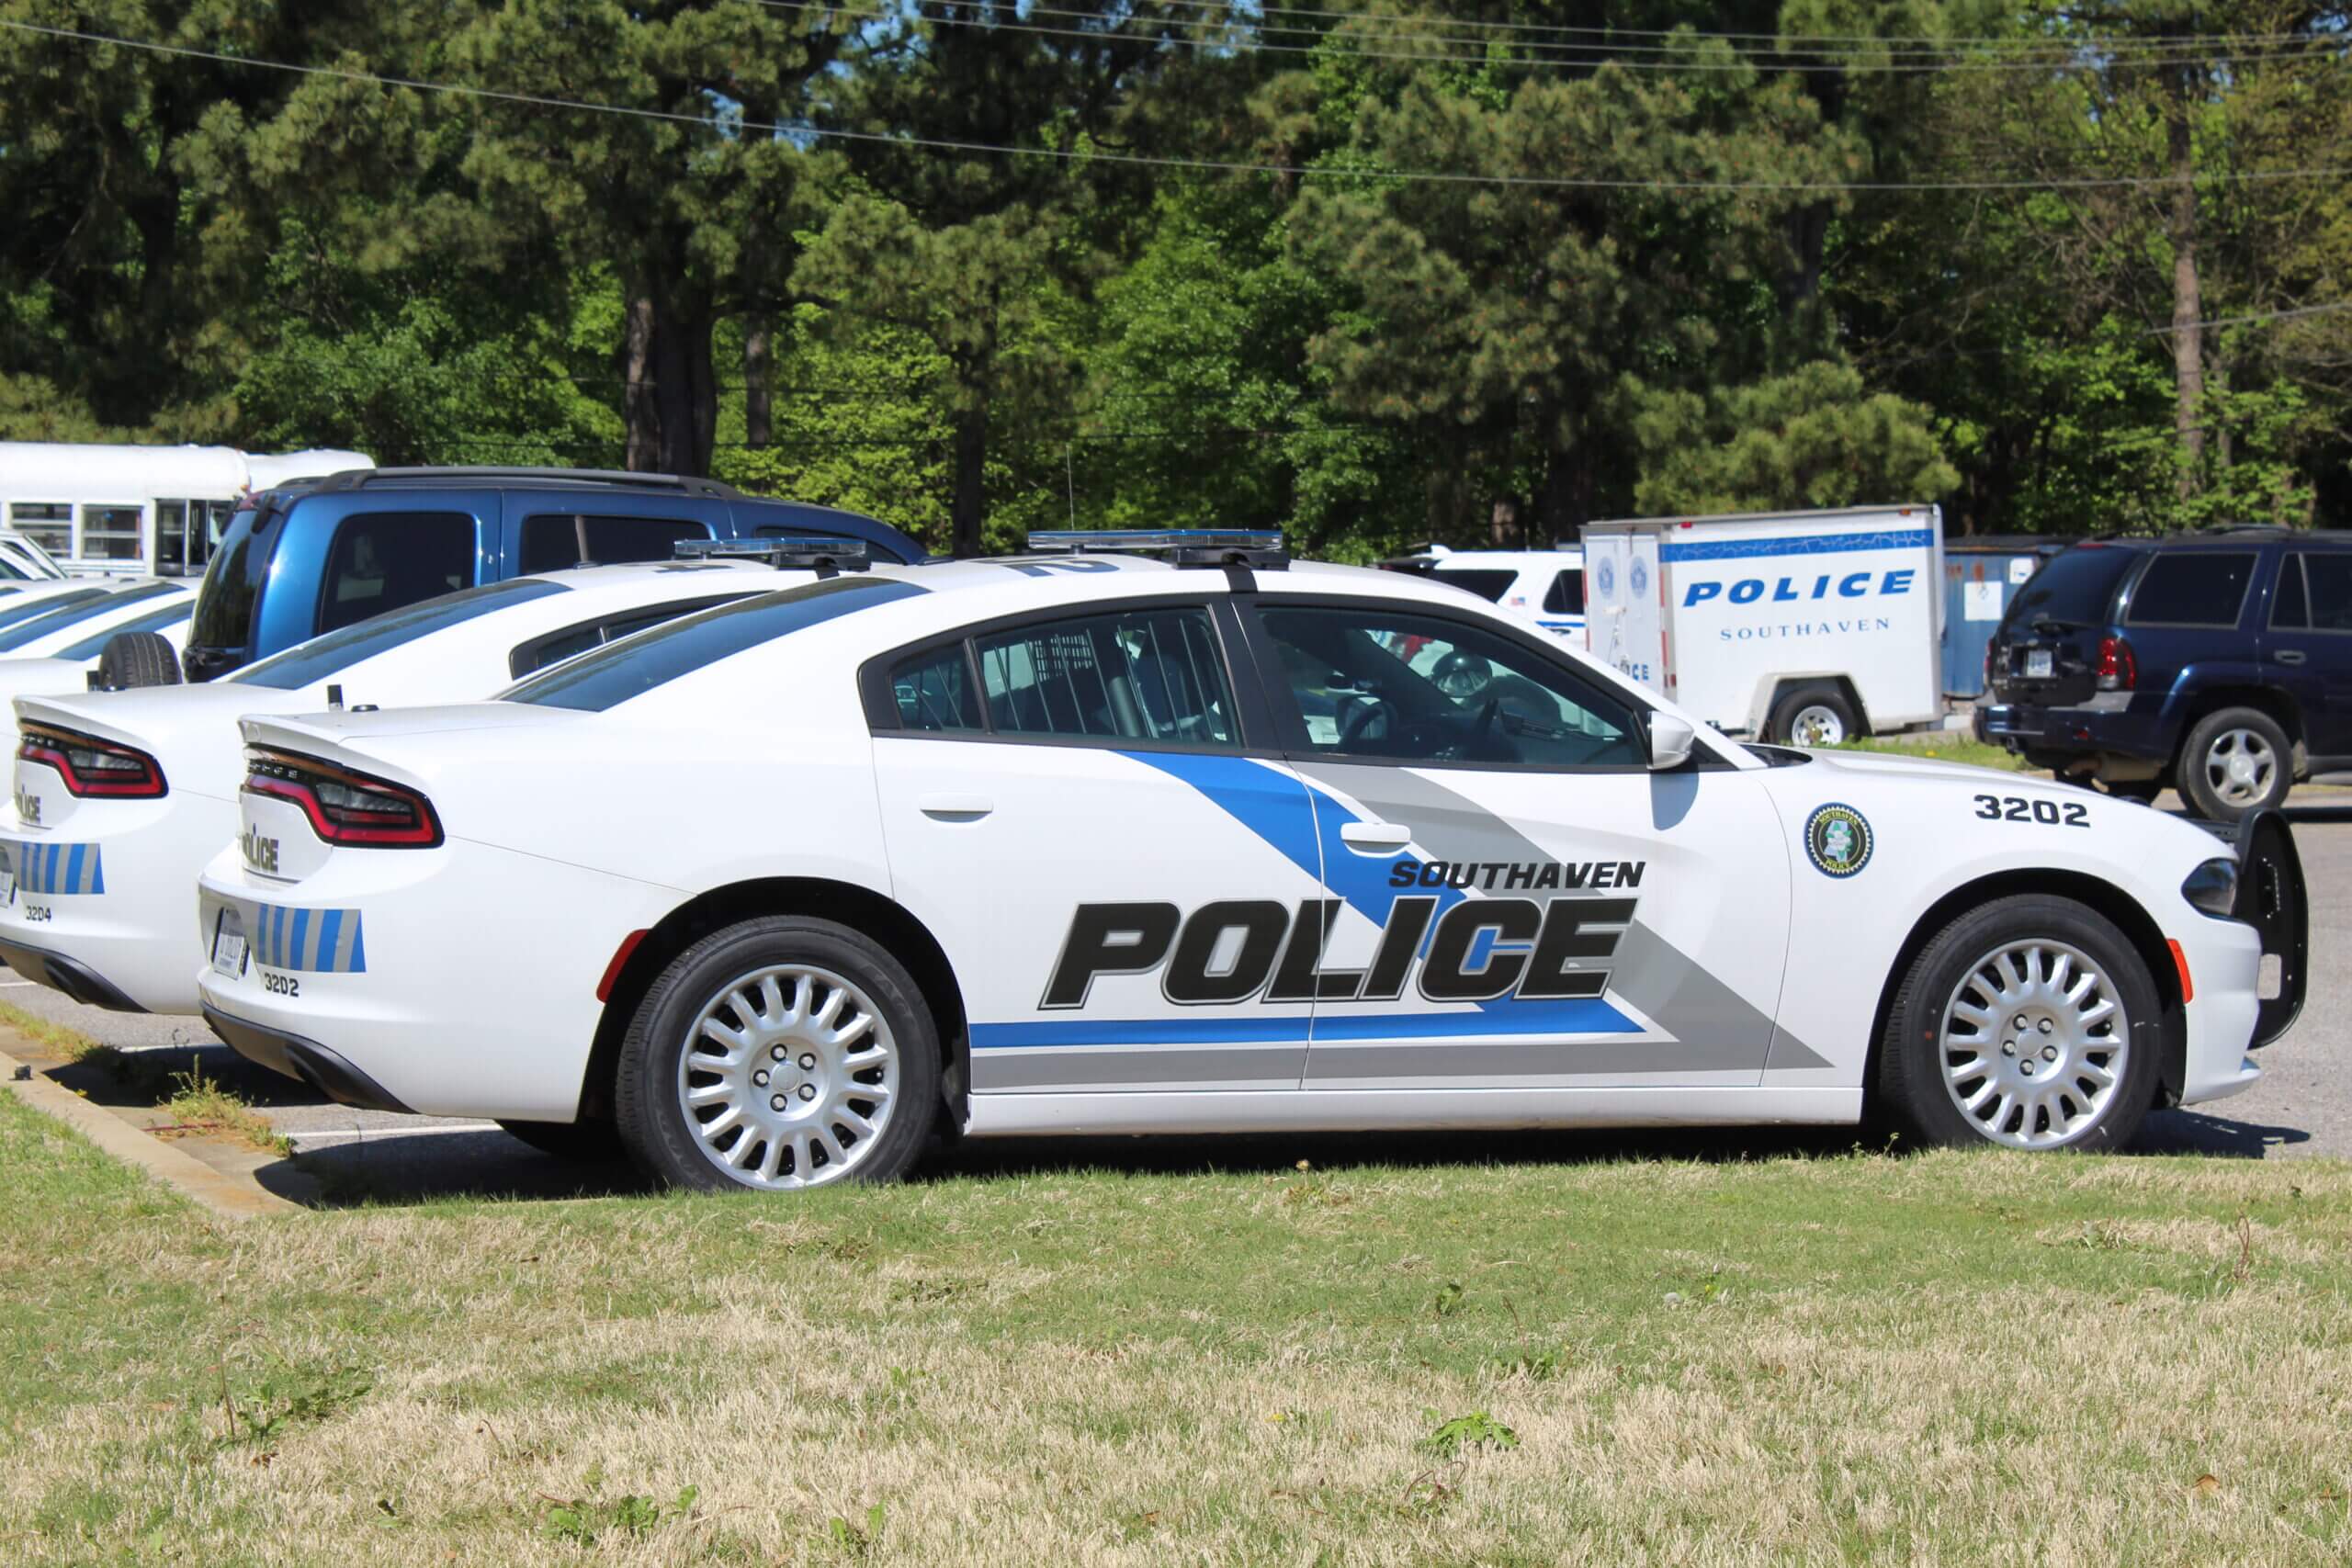 southaven police car